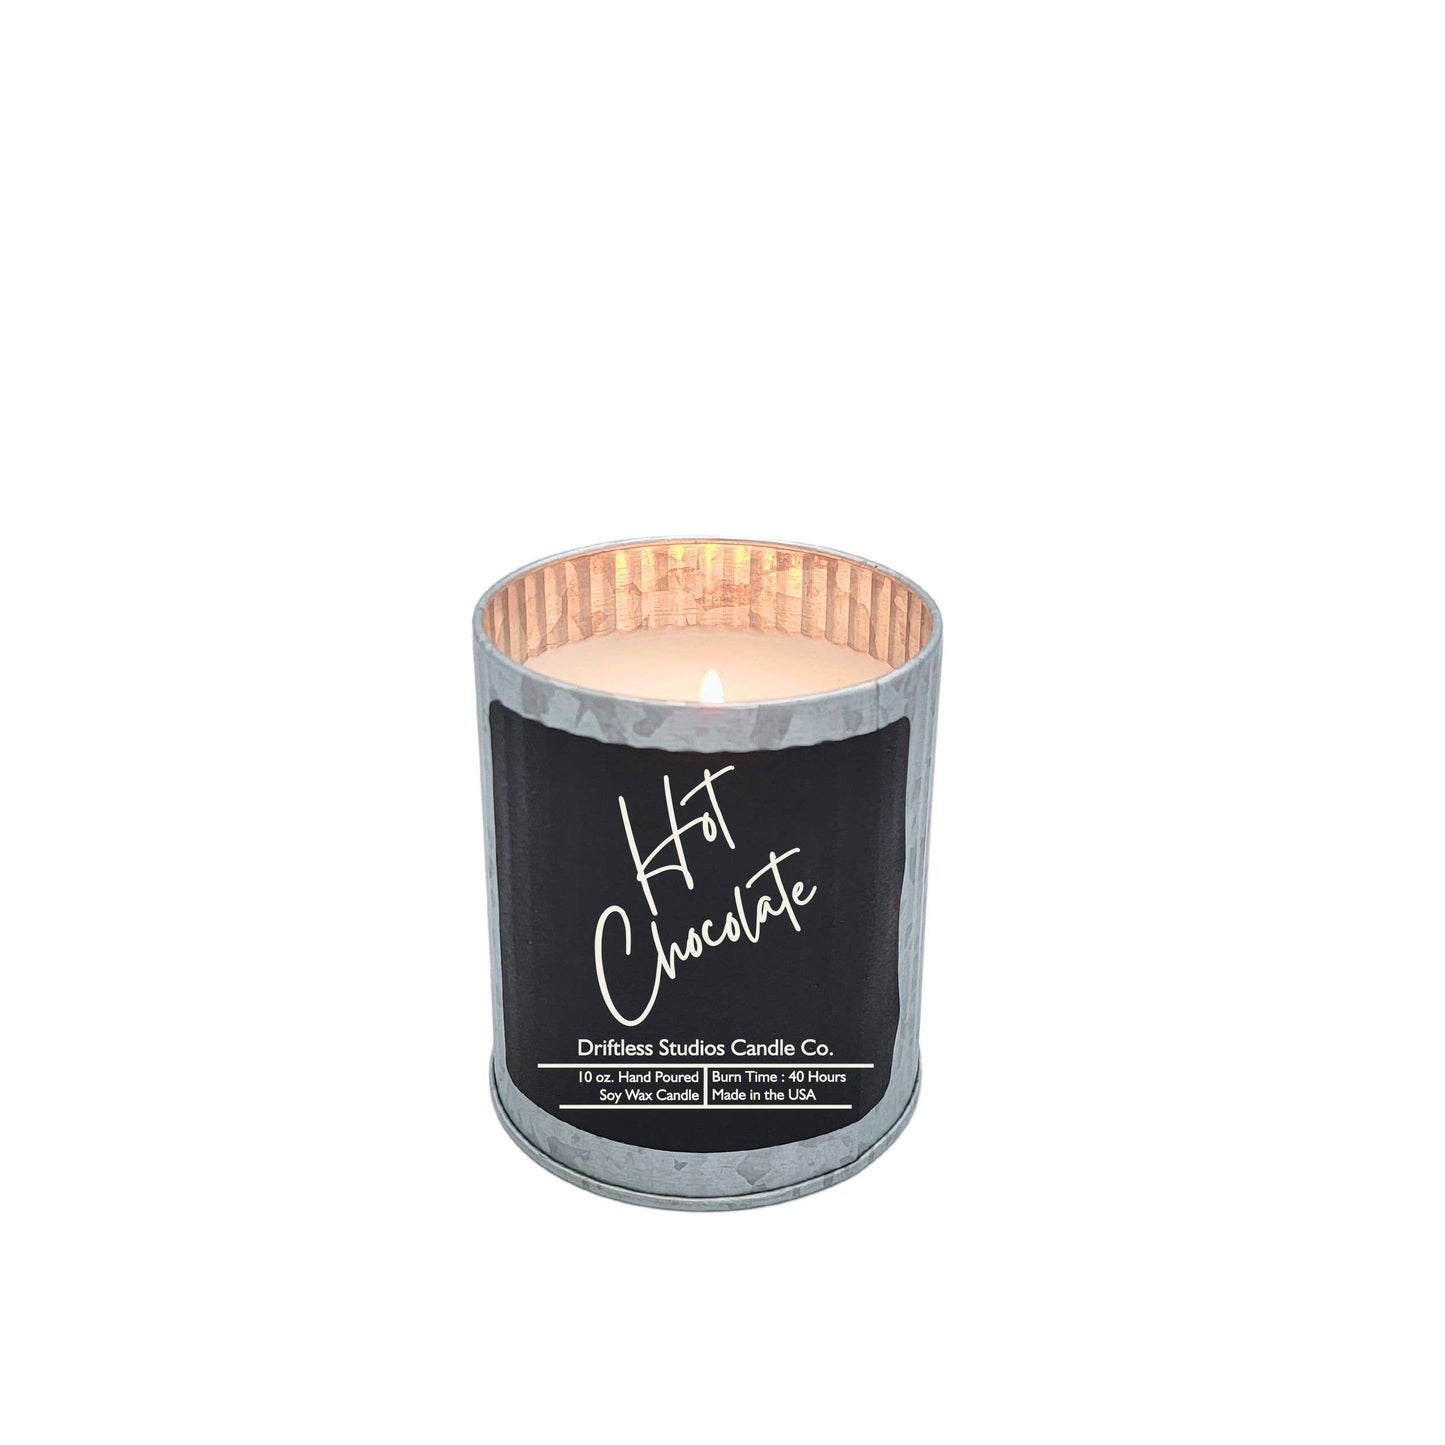 Hot Chocolate Soy Wax Candle